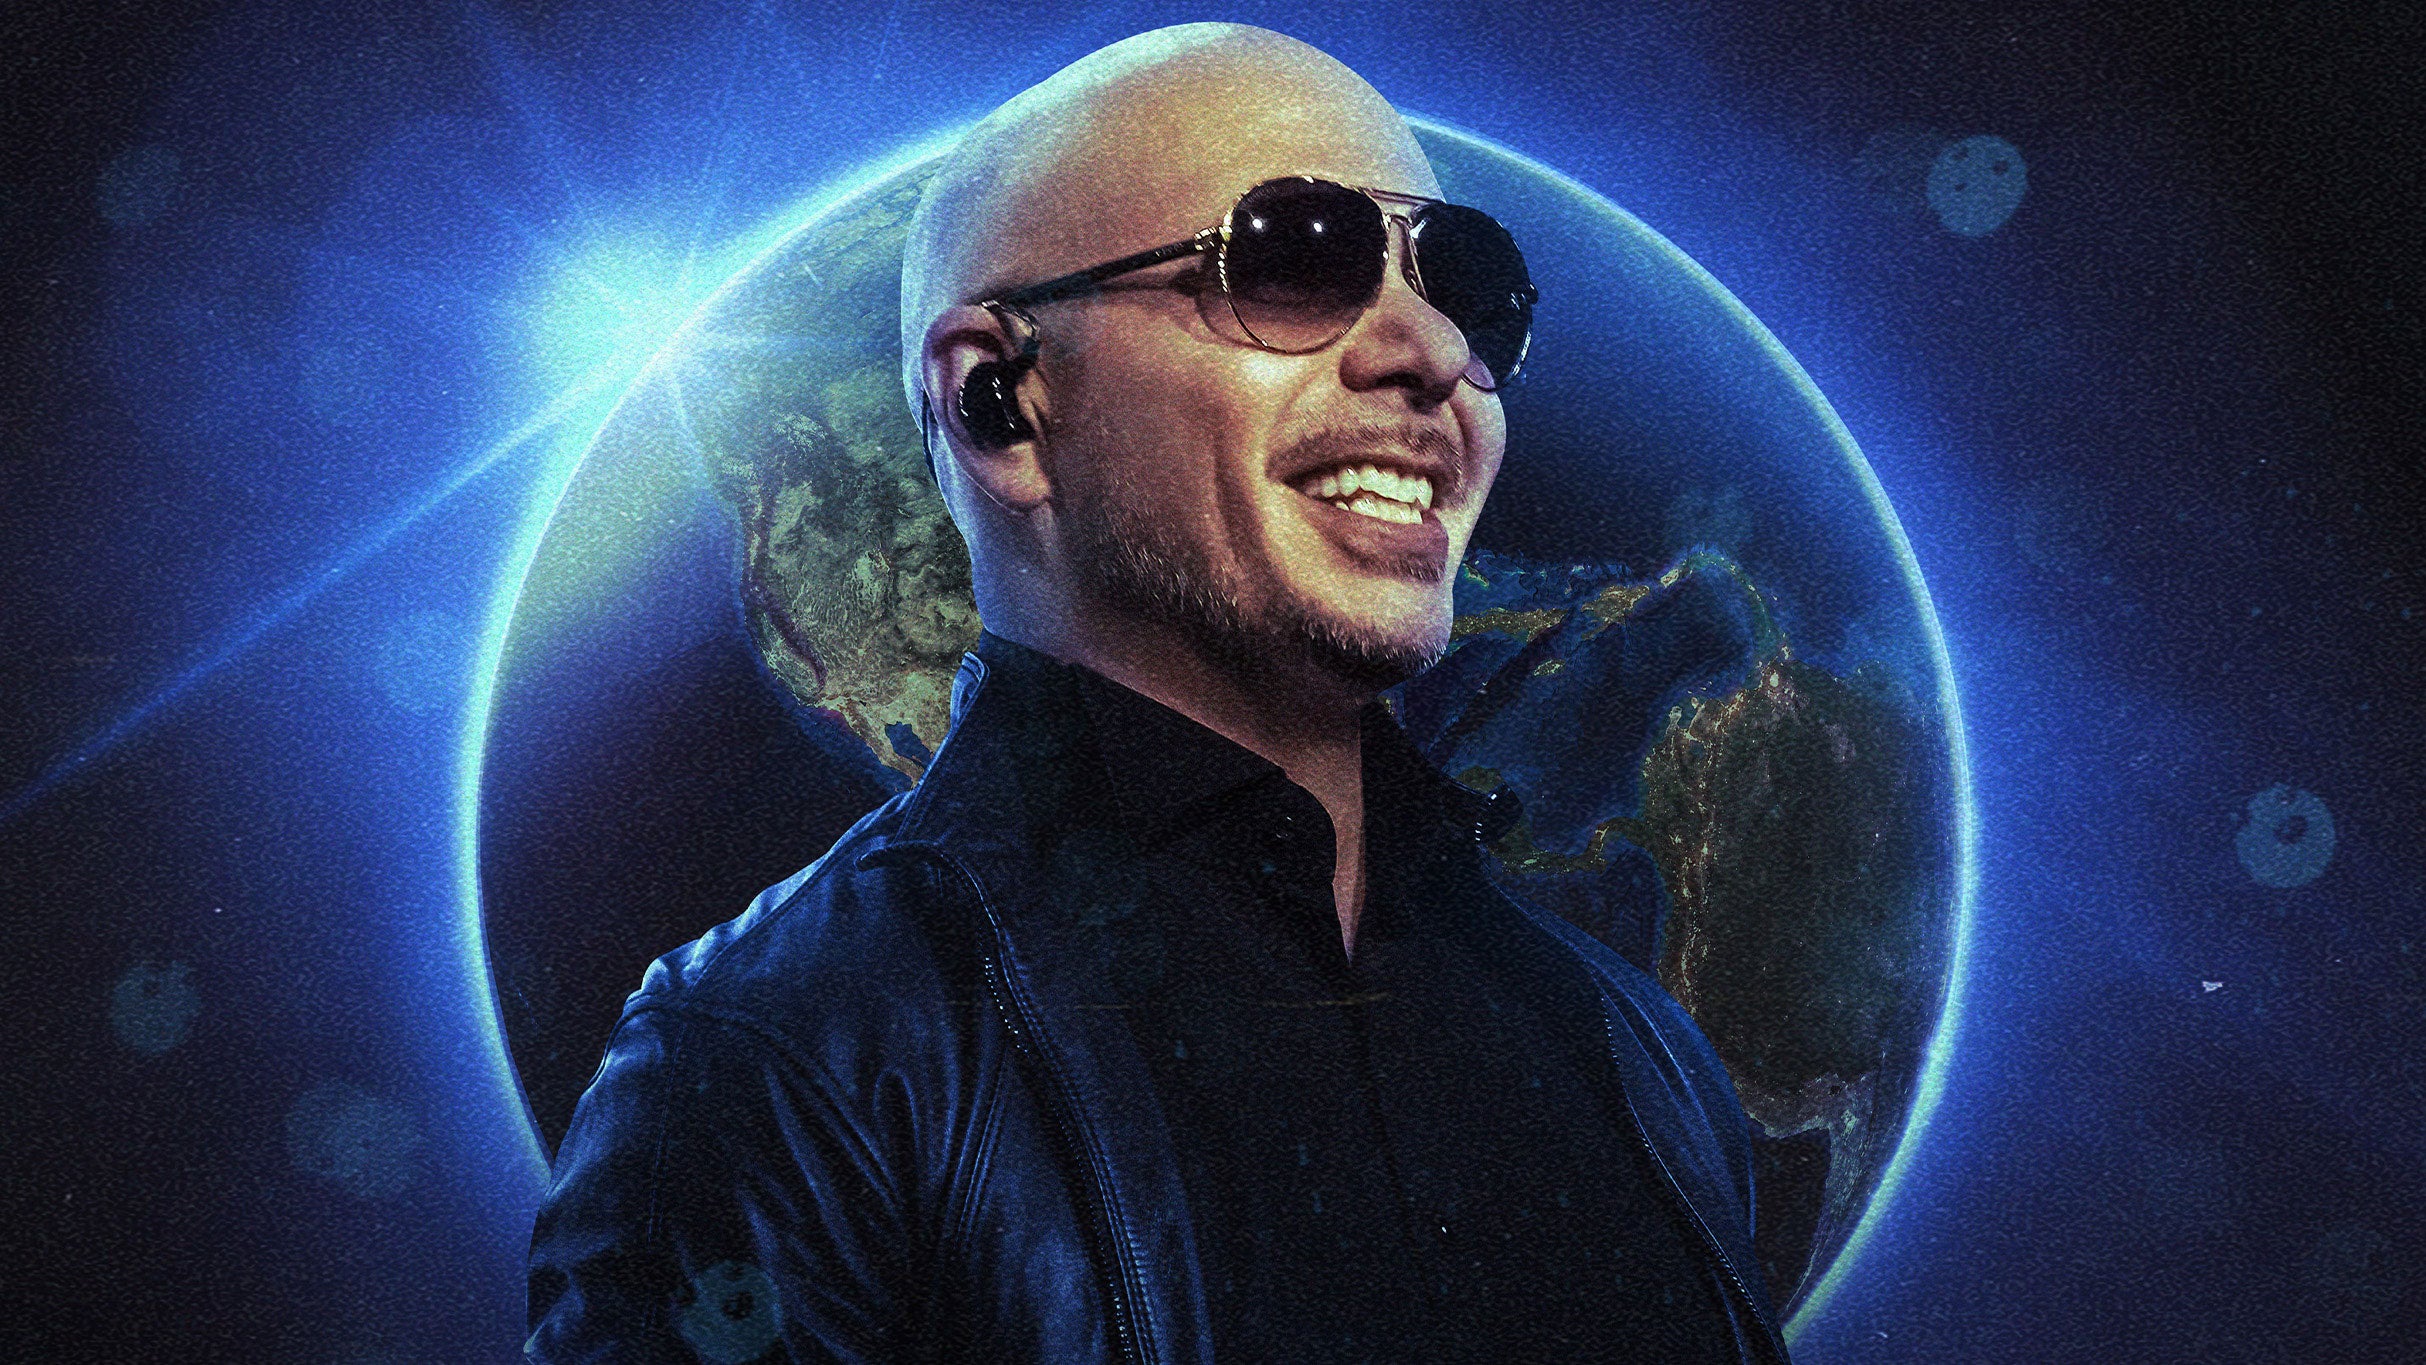 Pitbull: Party After Dark Tour presale code